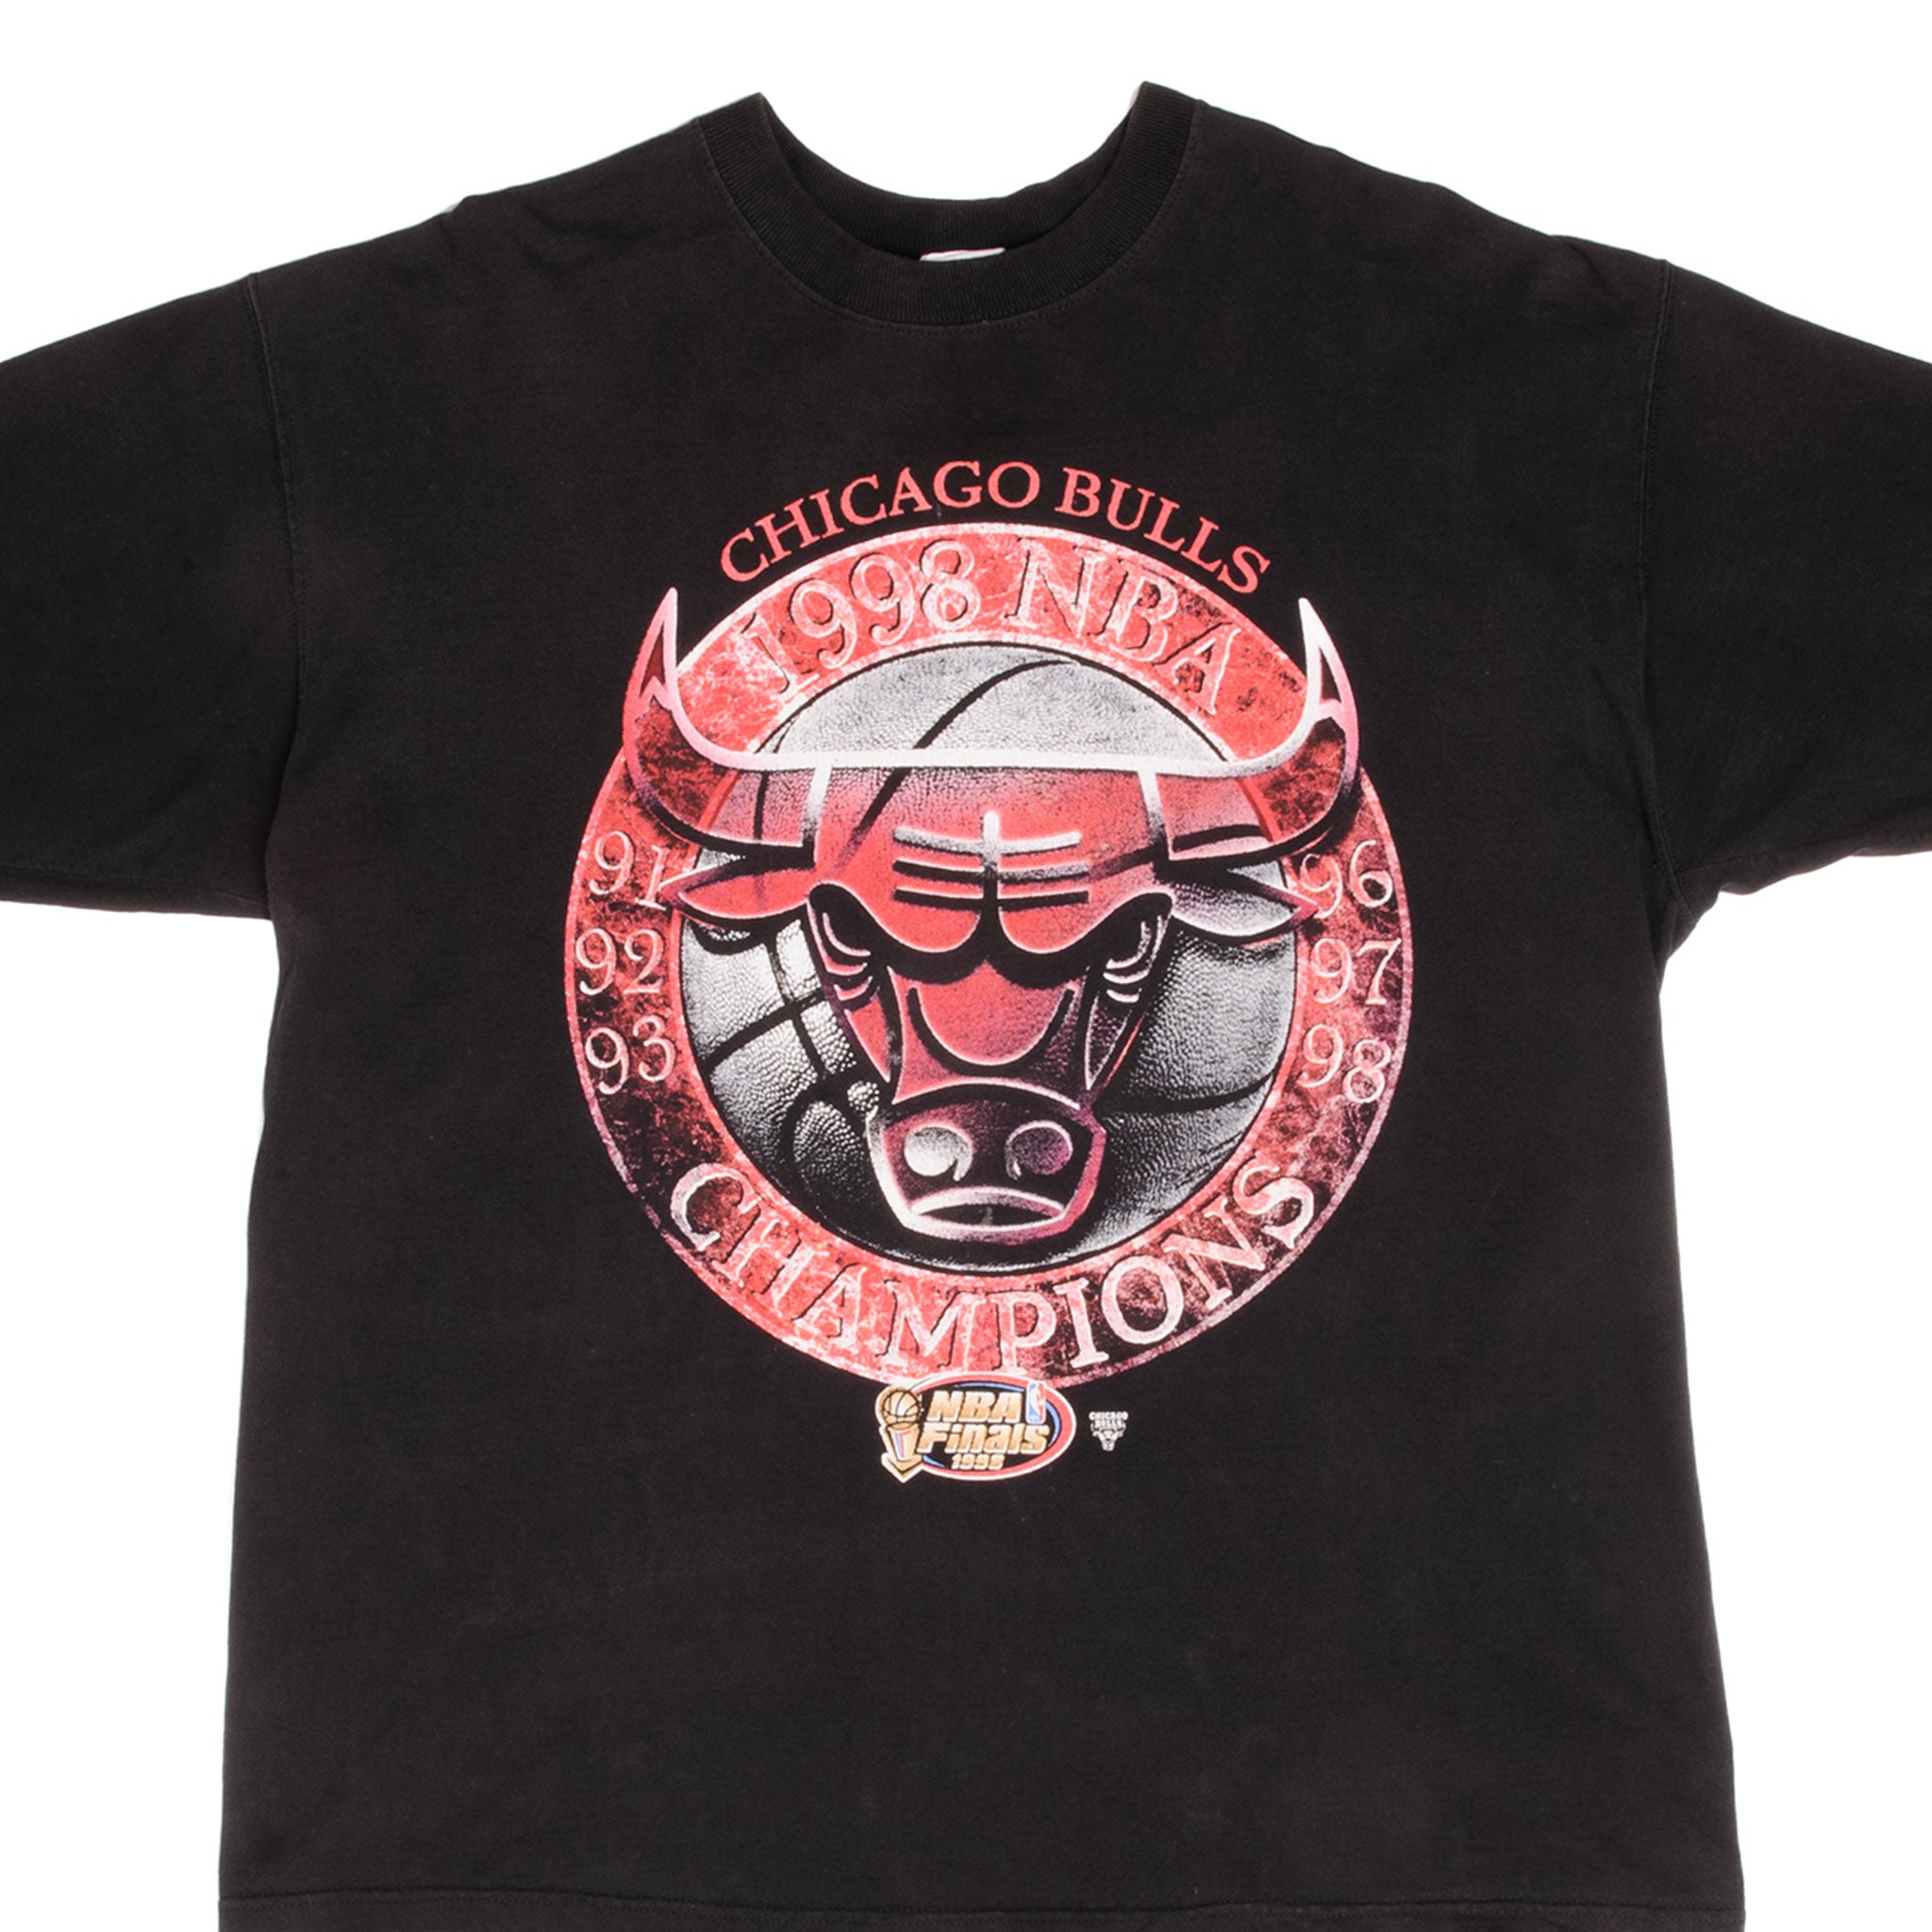 Chicago Bulls 1998 NBA Champions “Reigning Of The Bulls” Vintage